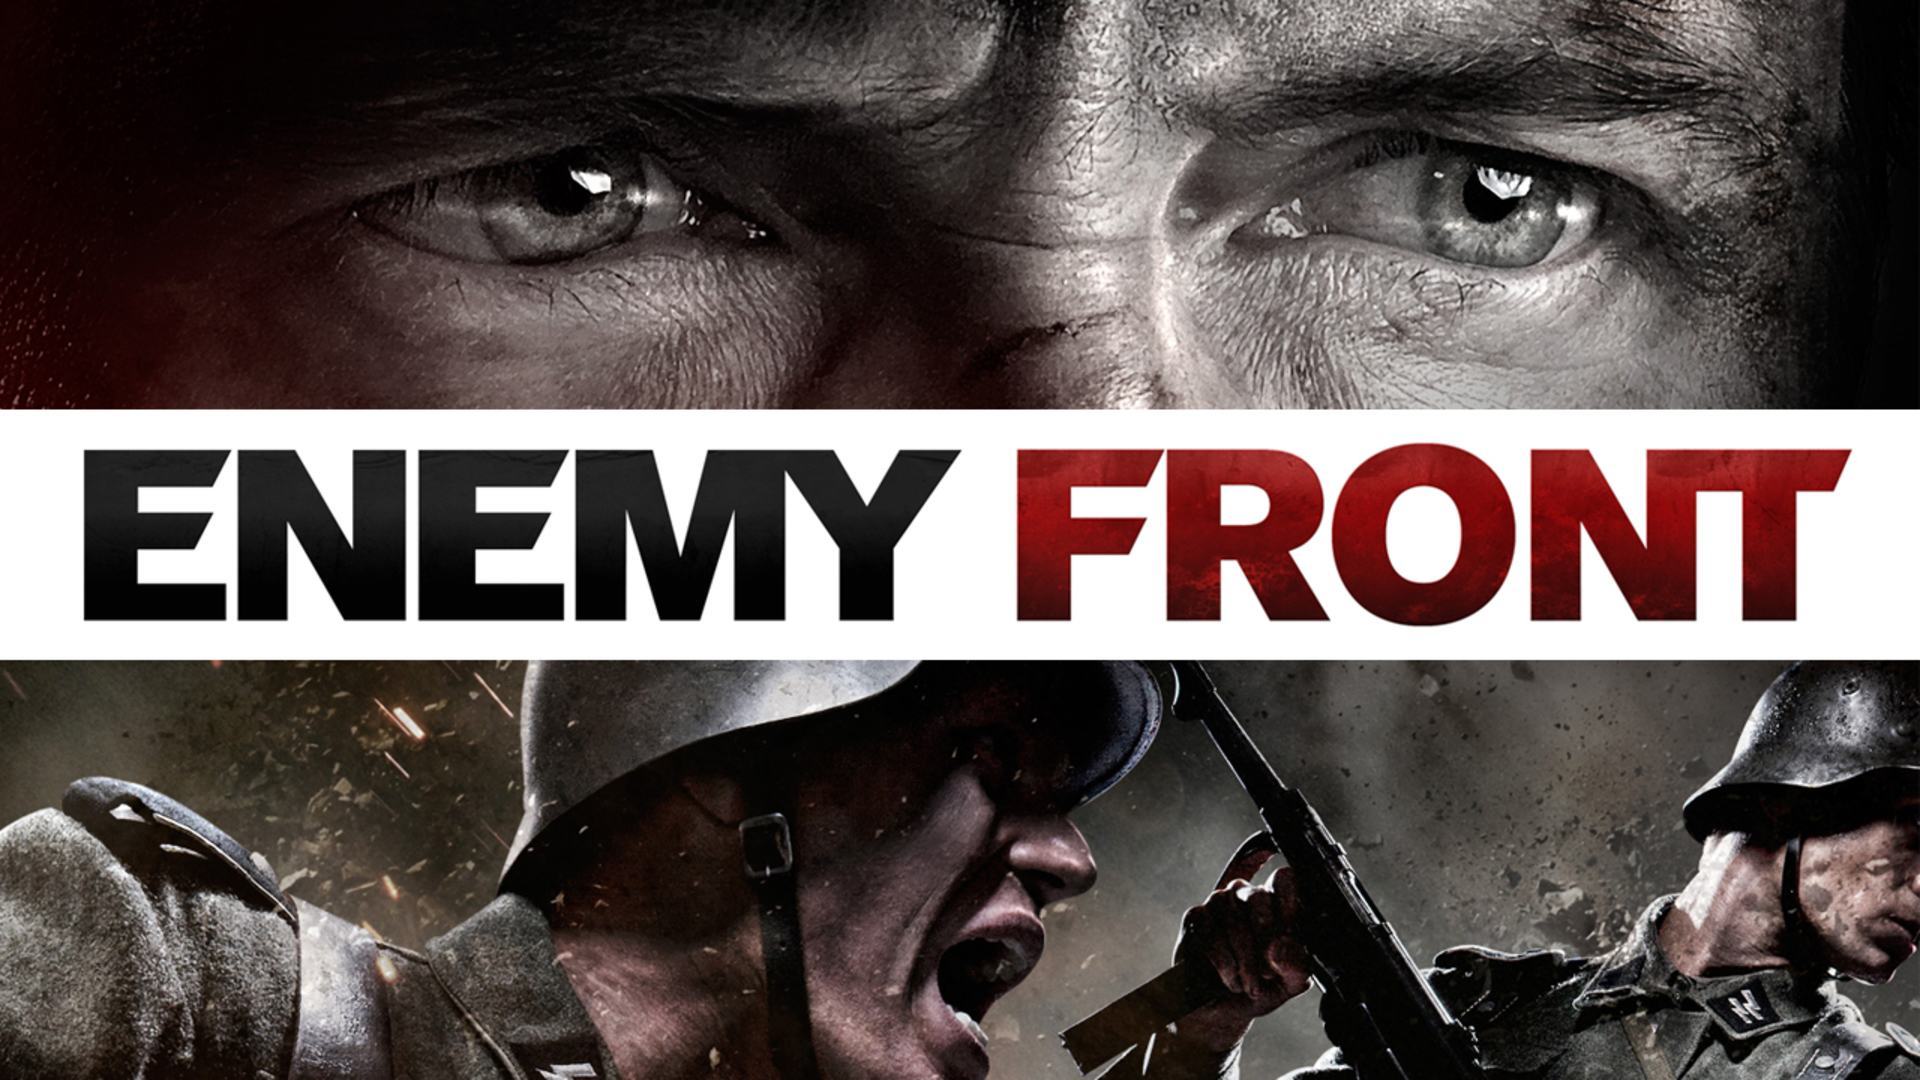 Enemy Front Giveaway at Opium Pulses now!